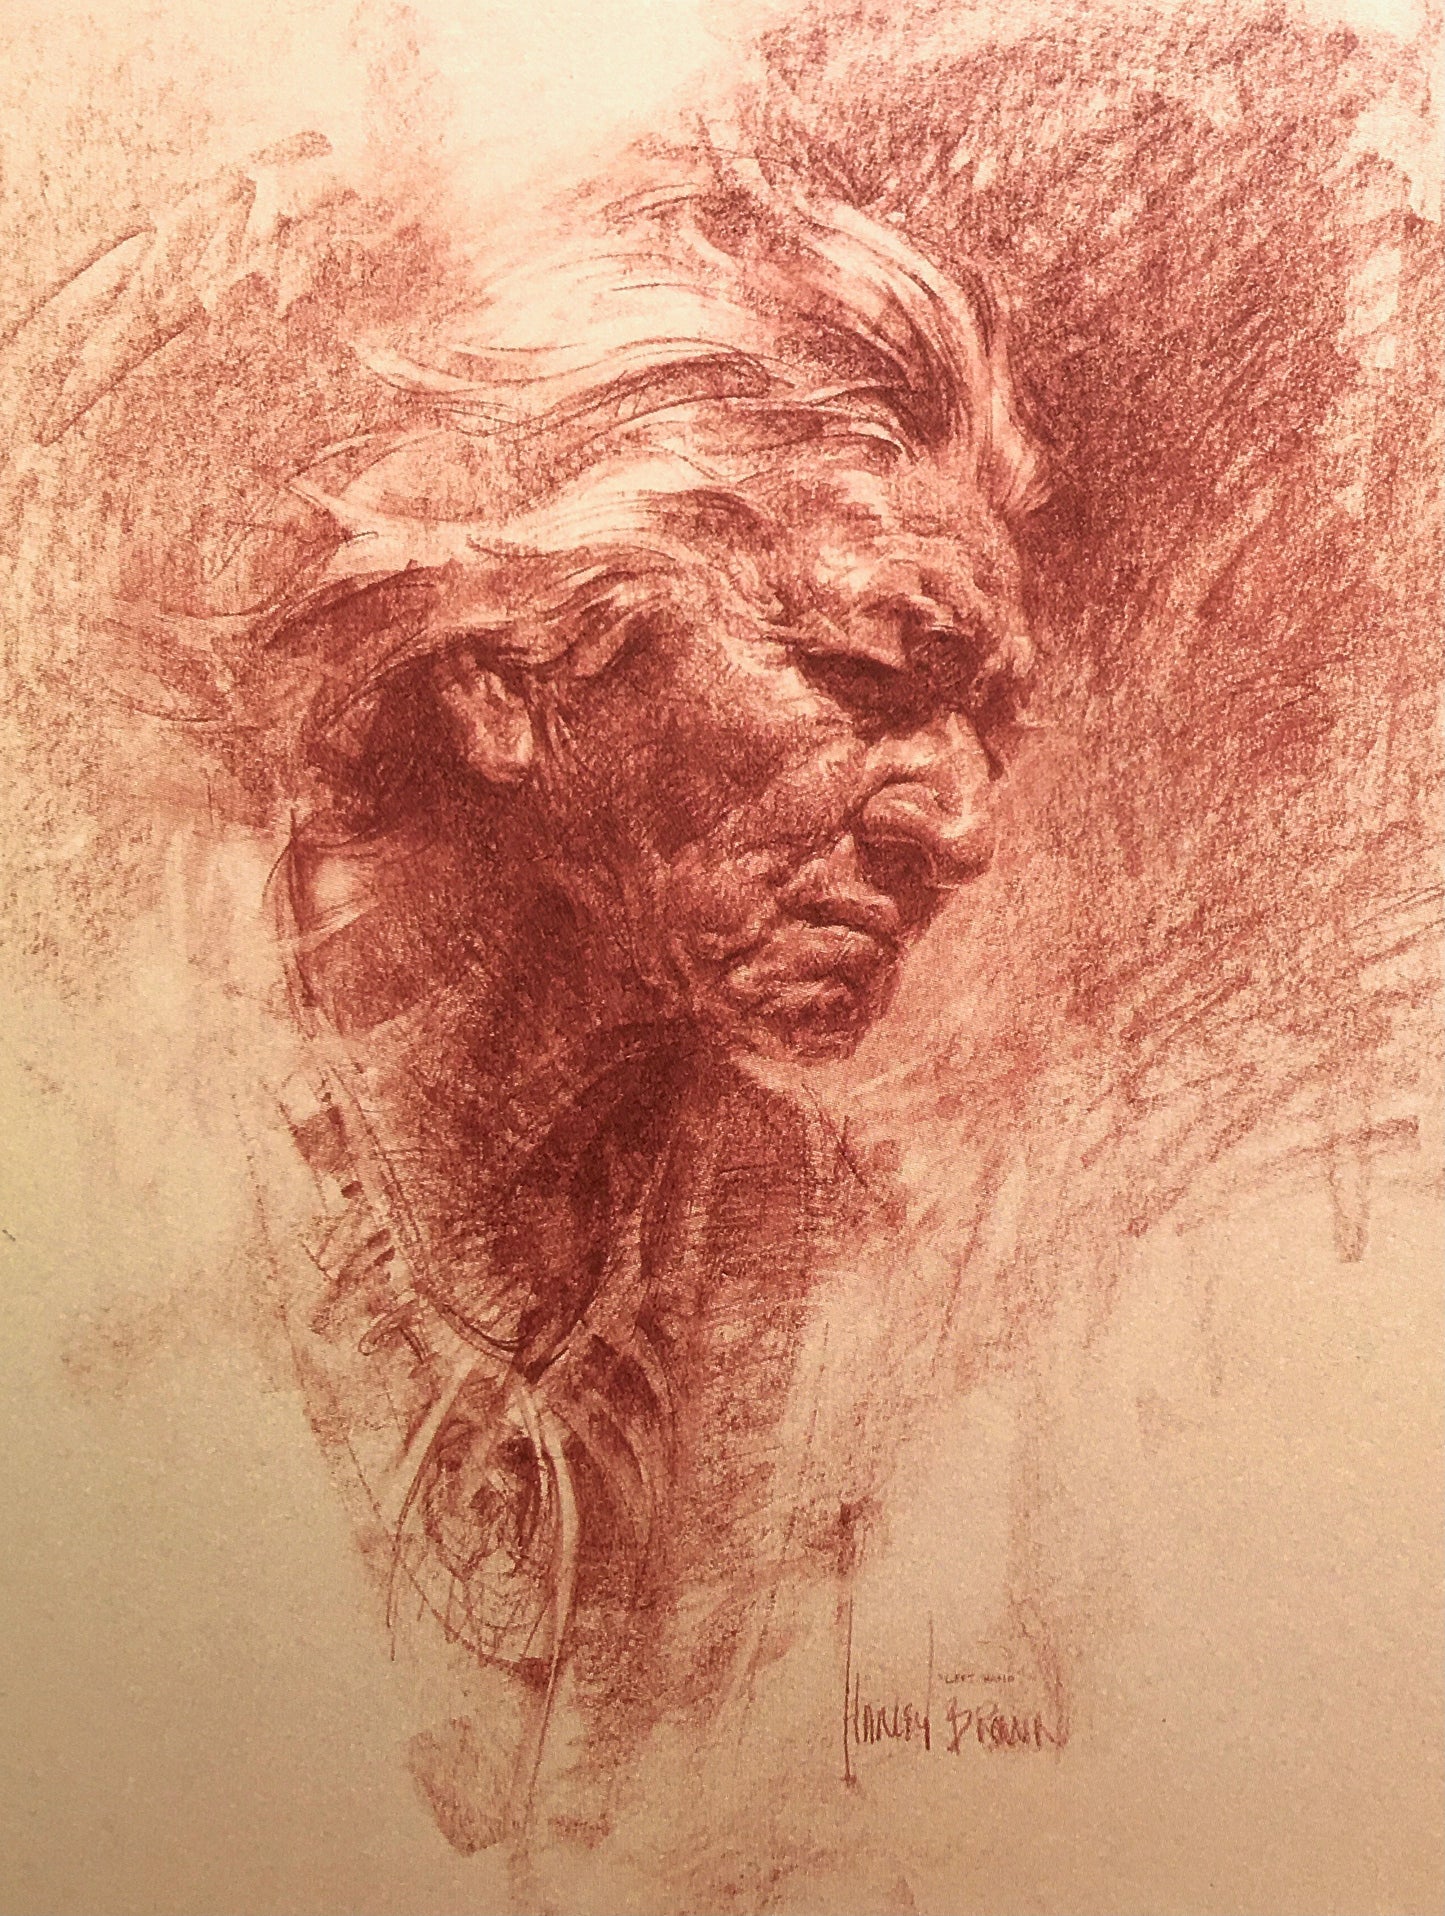 Left Hand- Signed by Harley Brown 12x9"